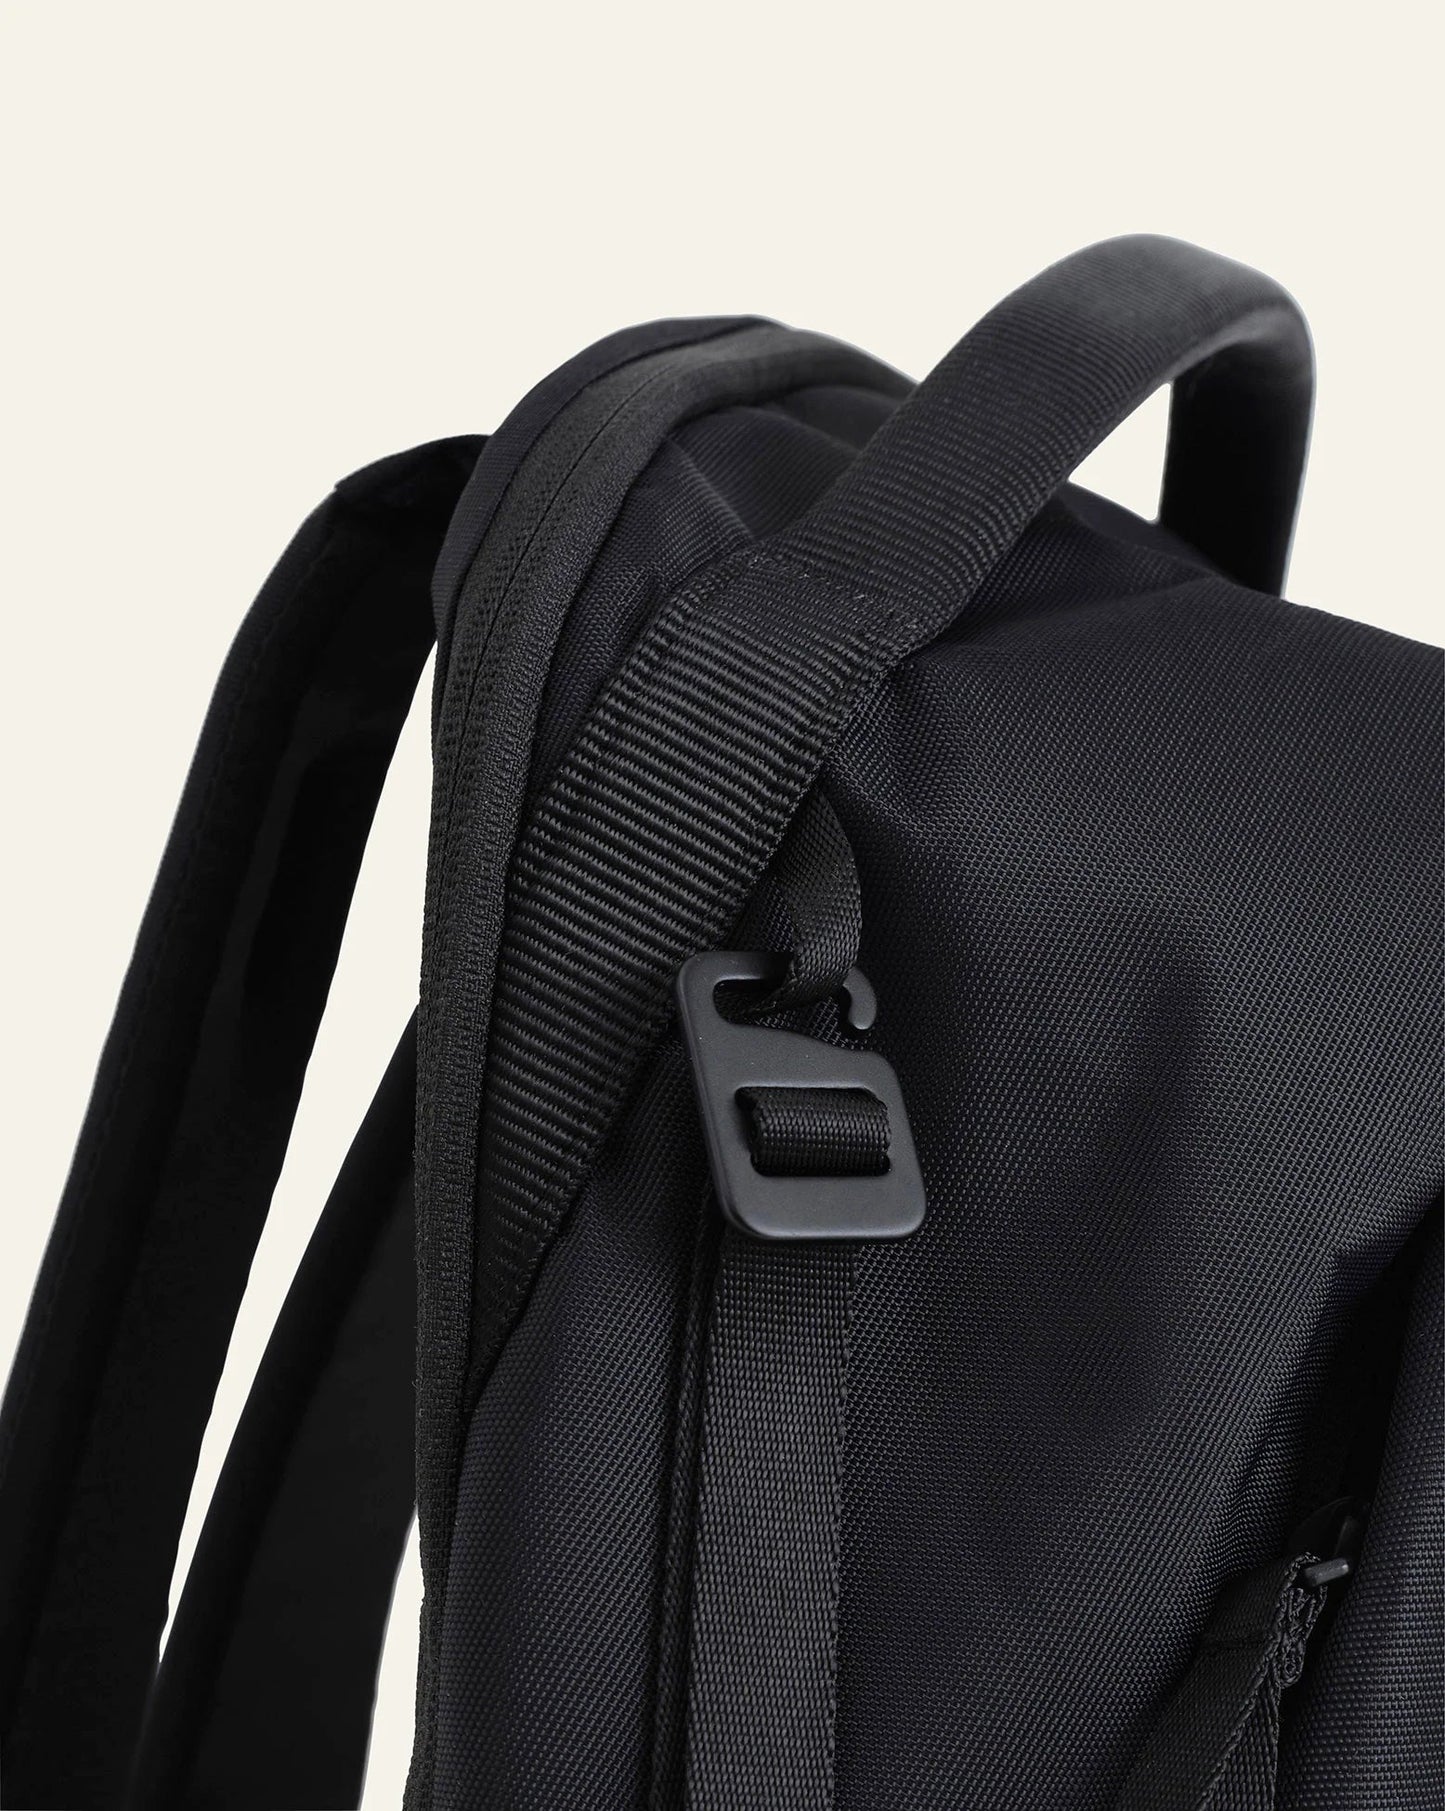 Best minimalist backpack for work and travel